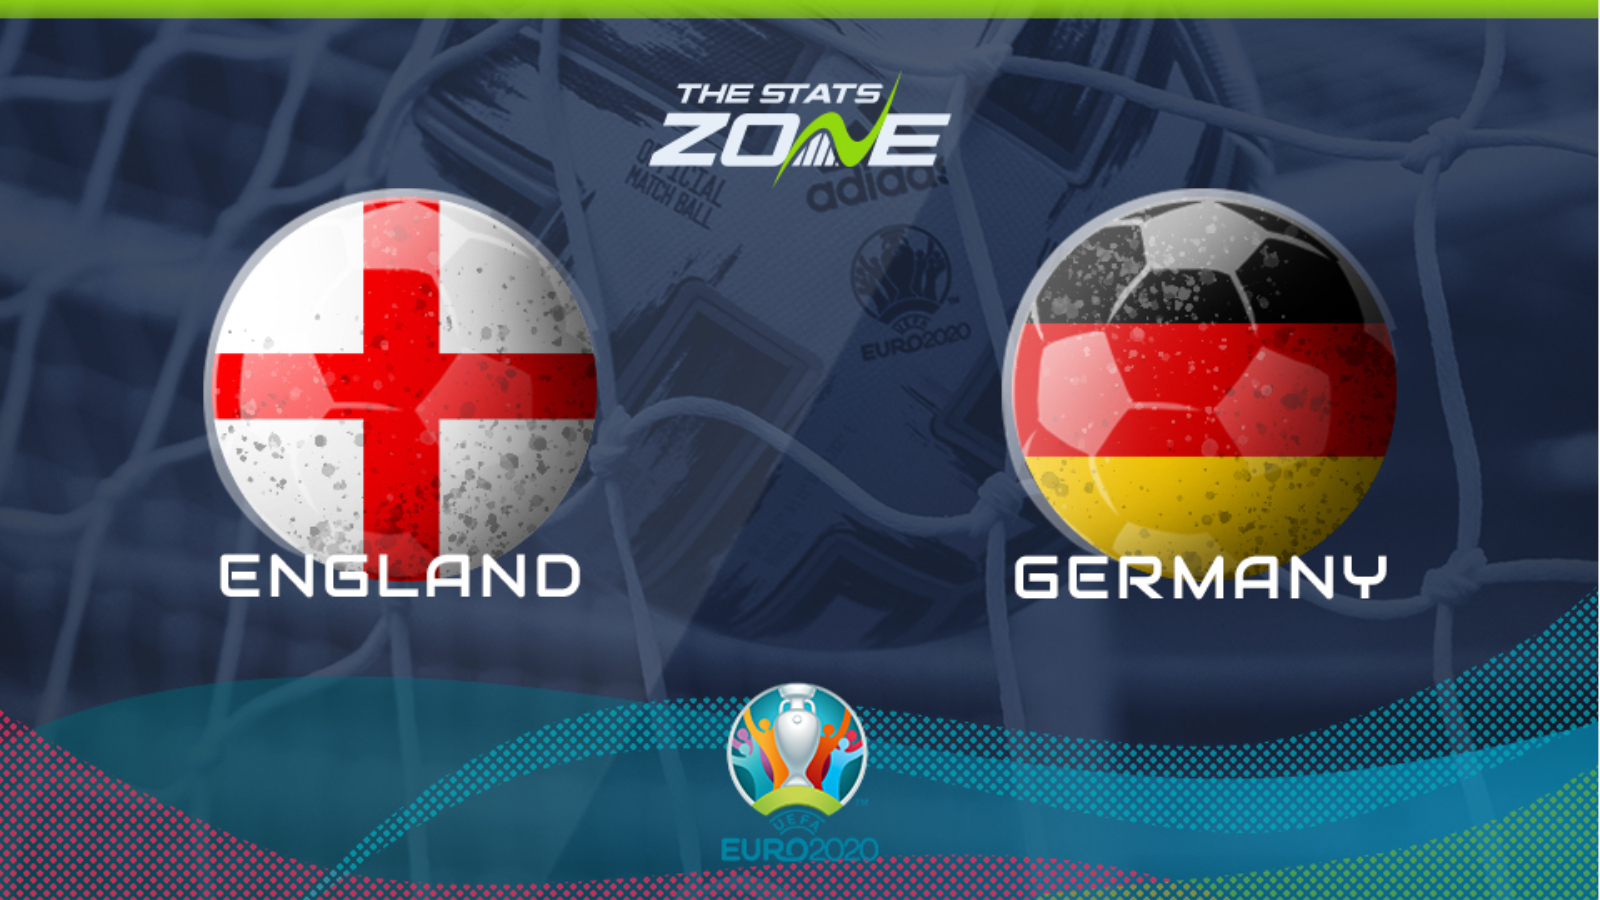 England vs Germany Preview & Prediction - The Stats Zone